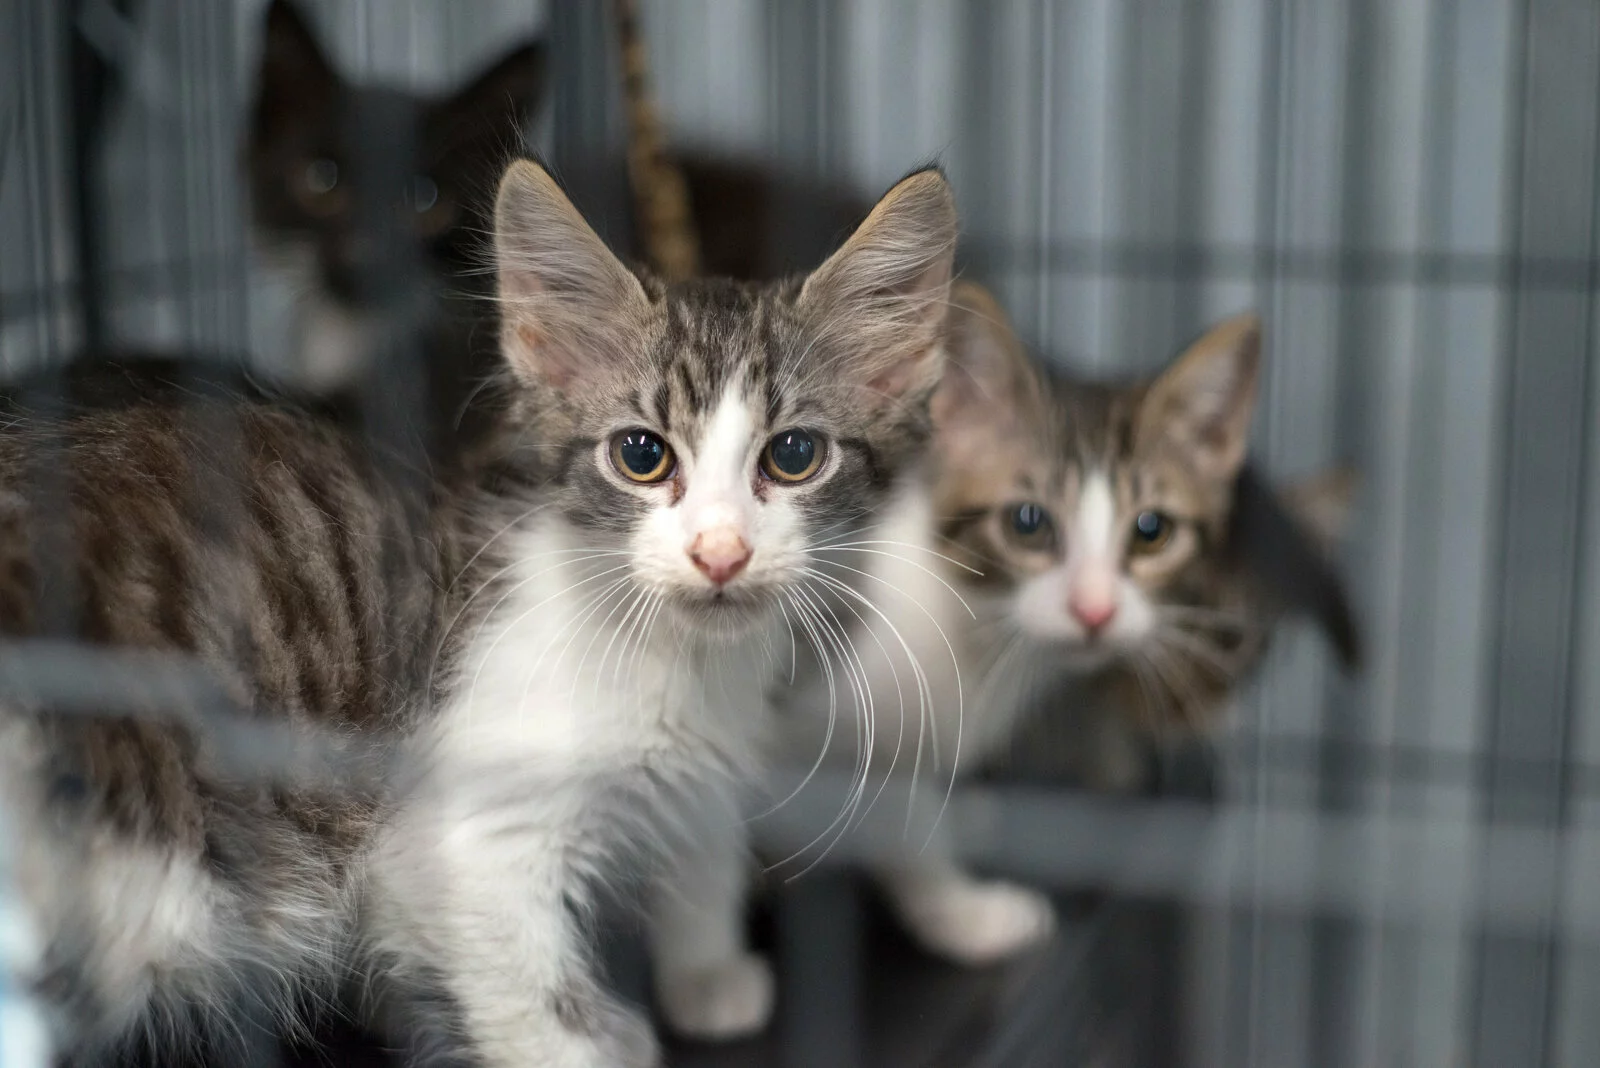 Group of kittens in the shelter